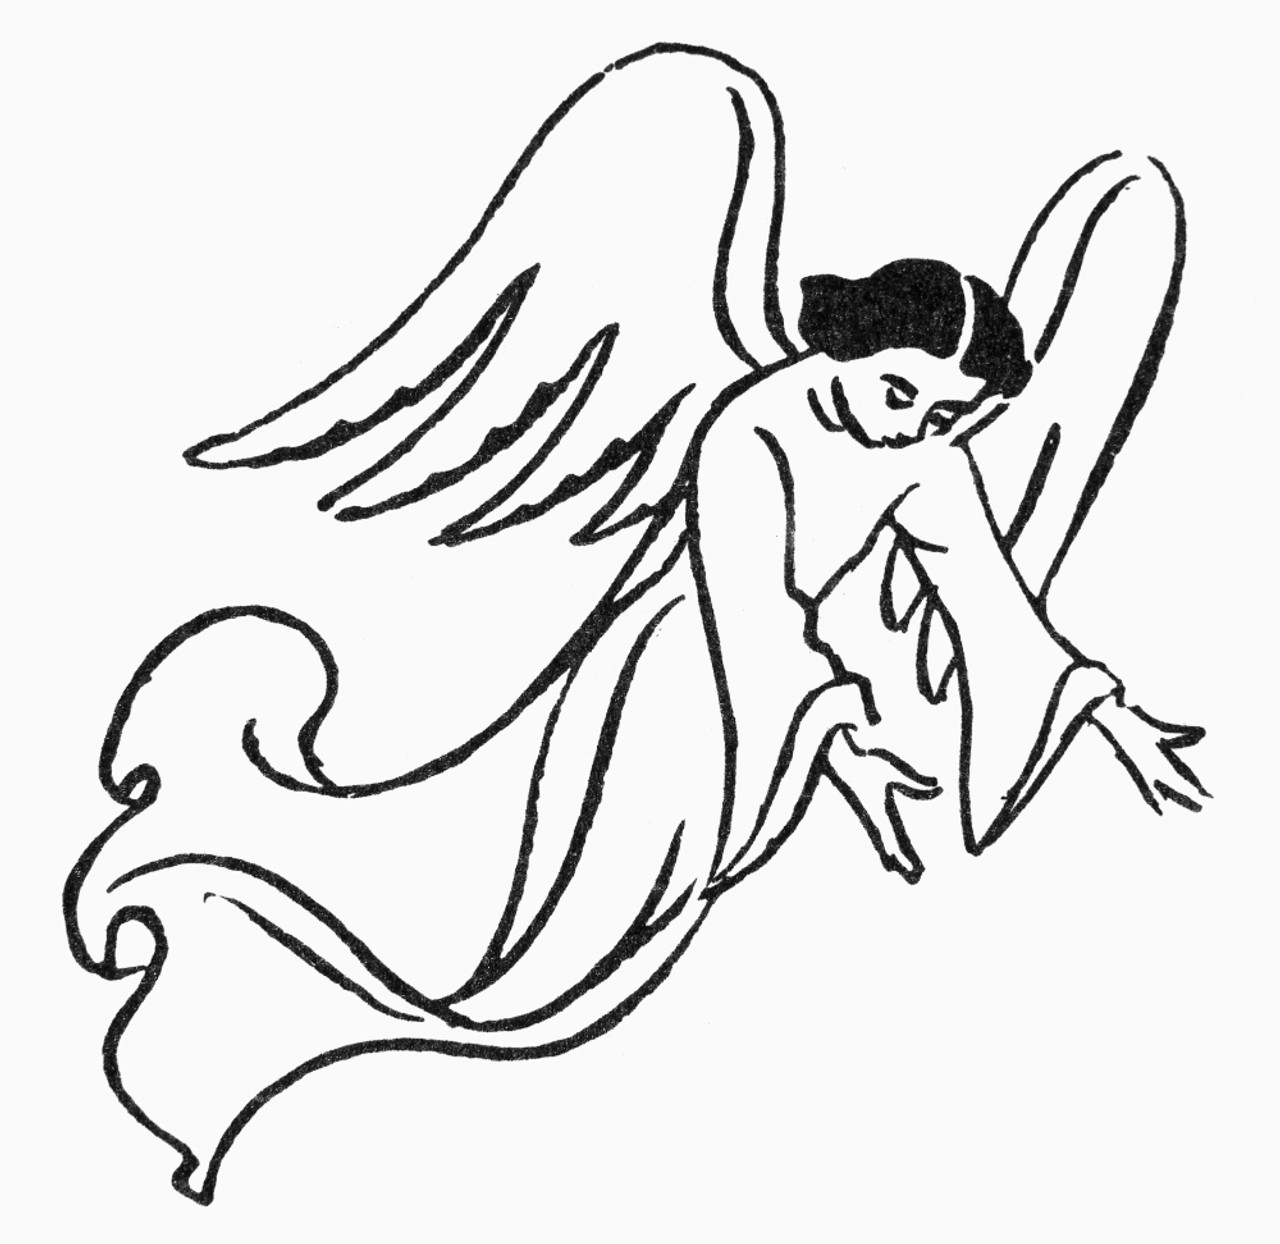 1,671 Guardian Angel Drawing Images, Stock Photos & Vectors | Shutterstock